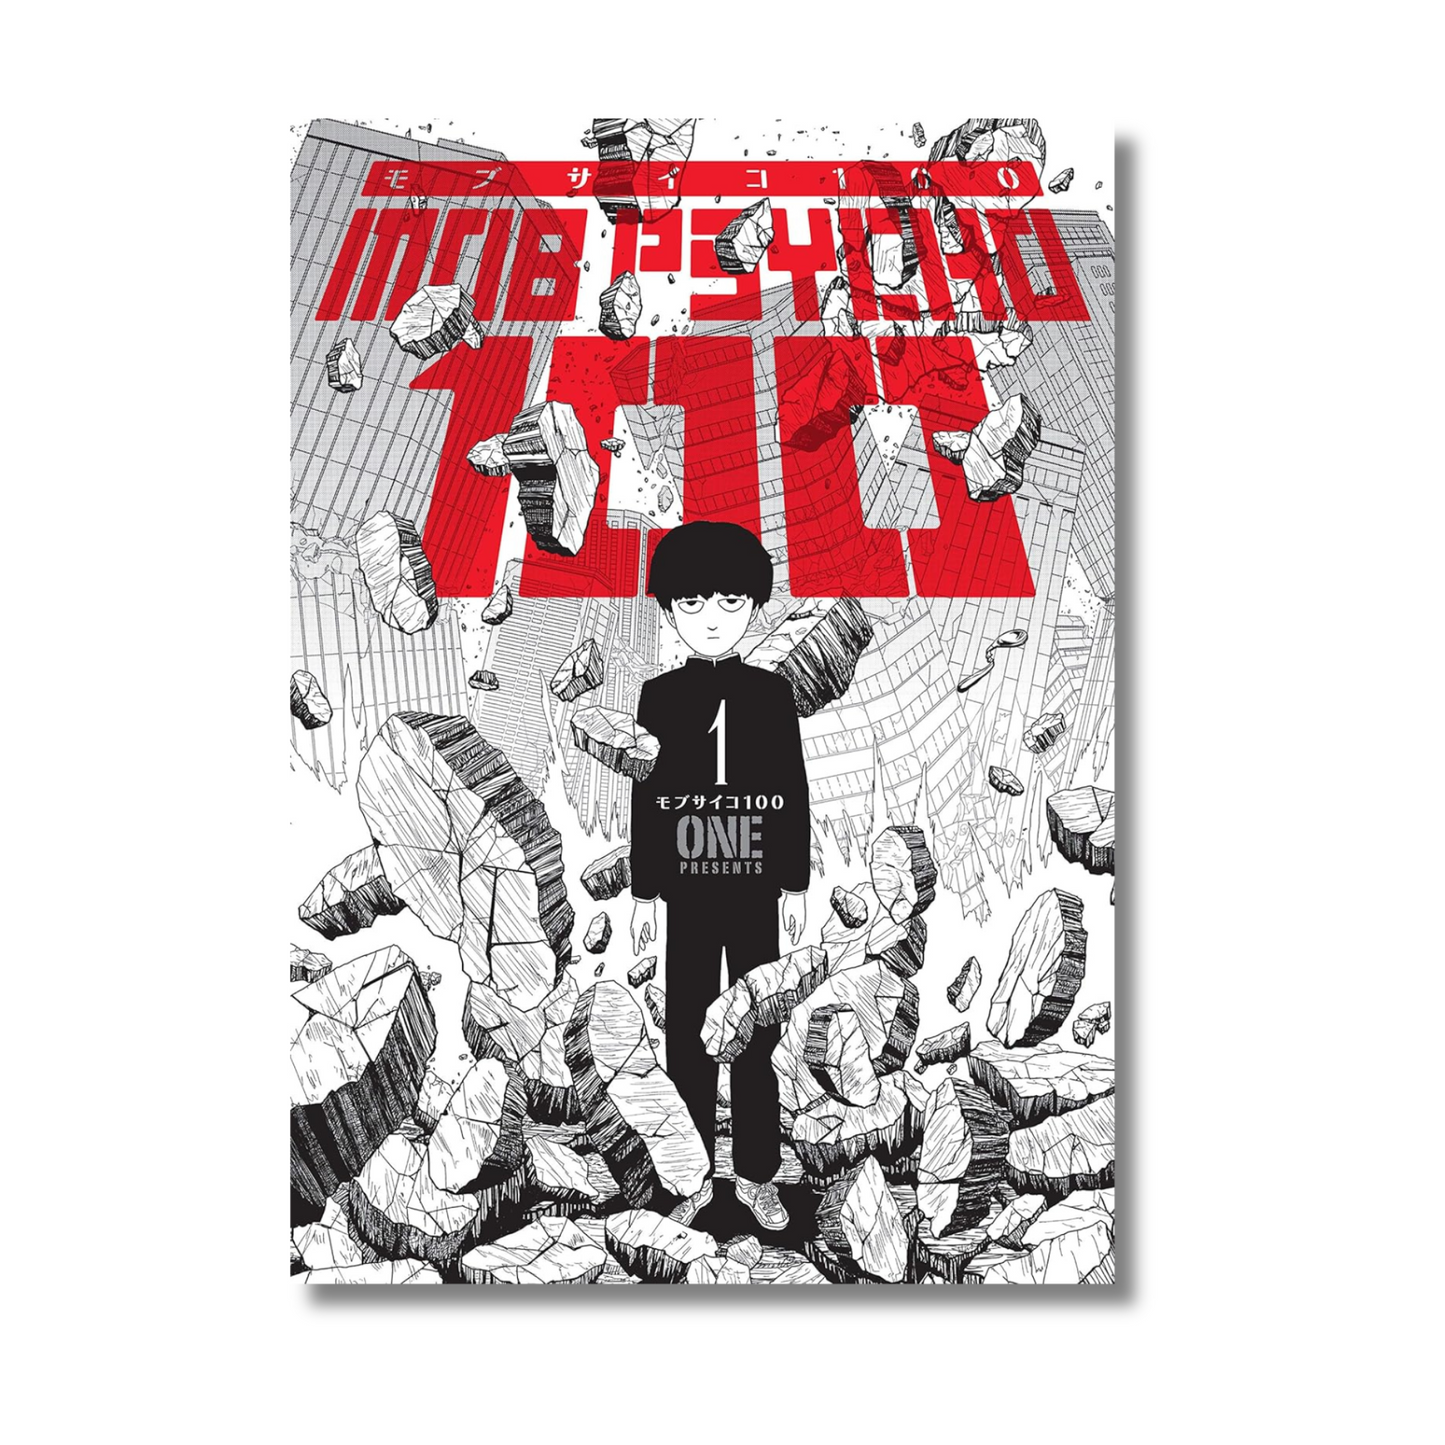 Mob Psycho 100 Vol 1 By One (Paperback)